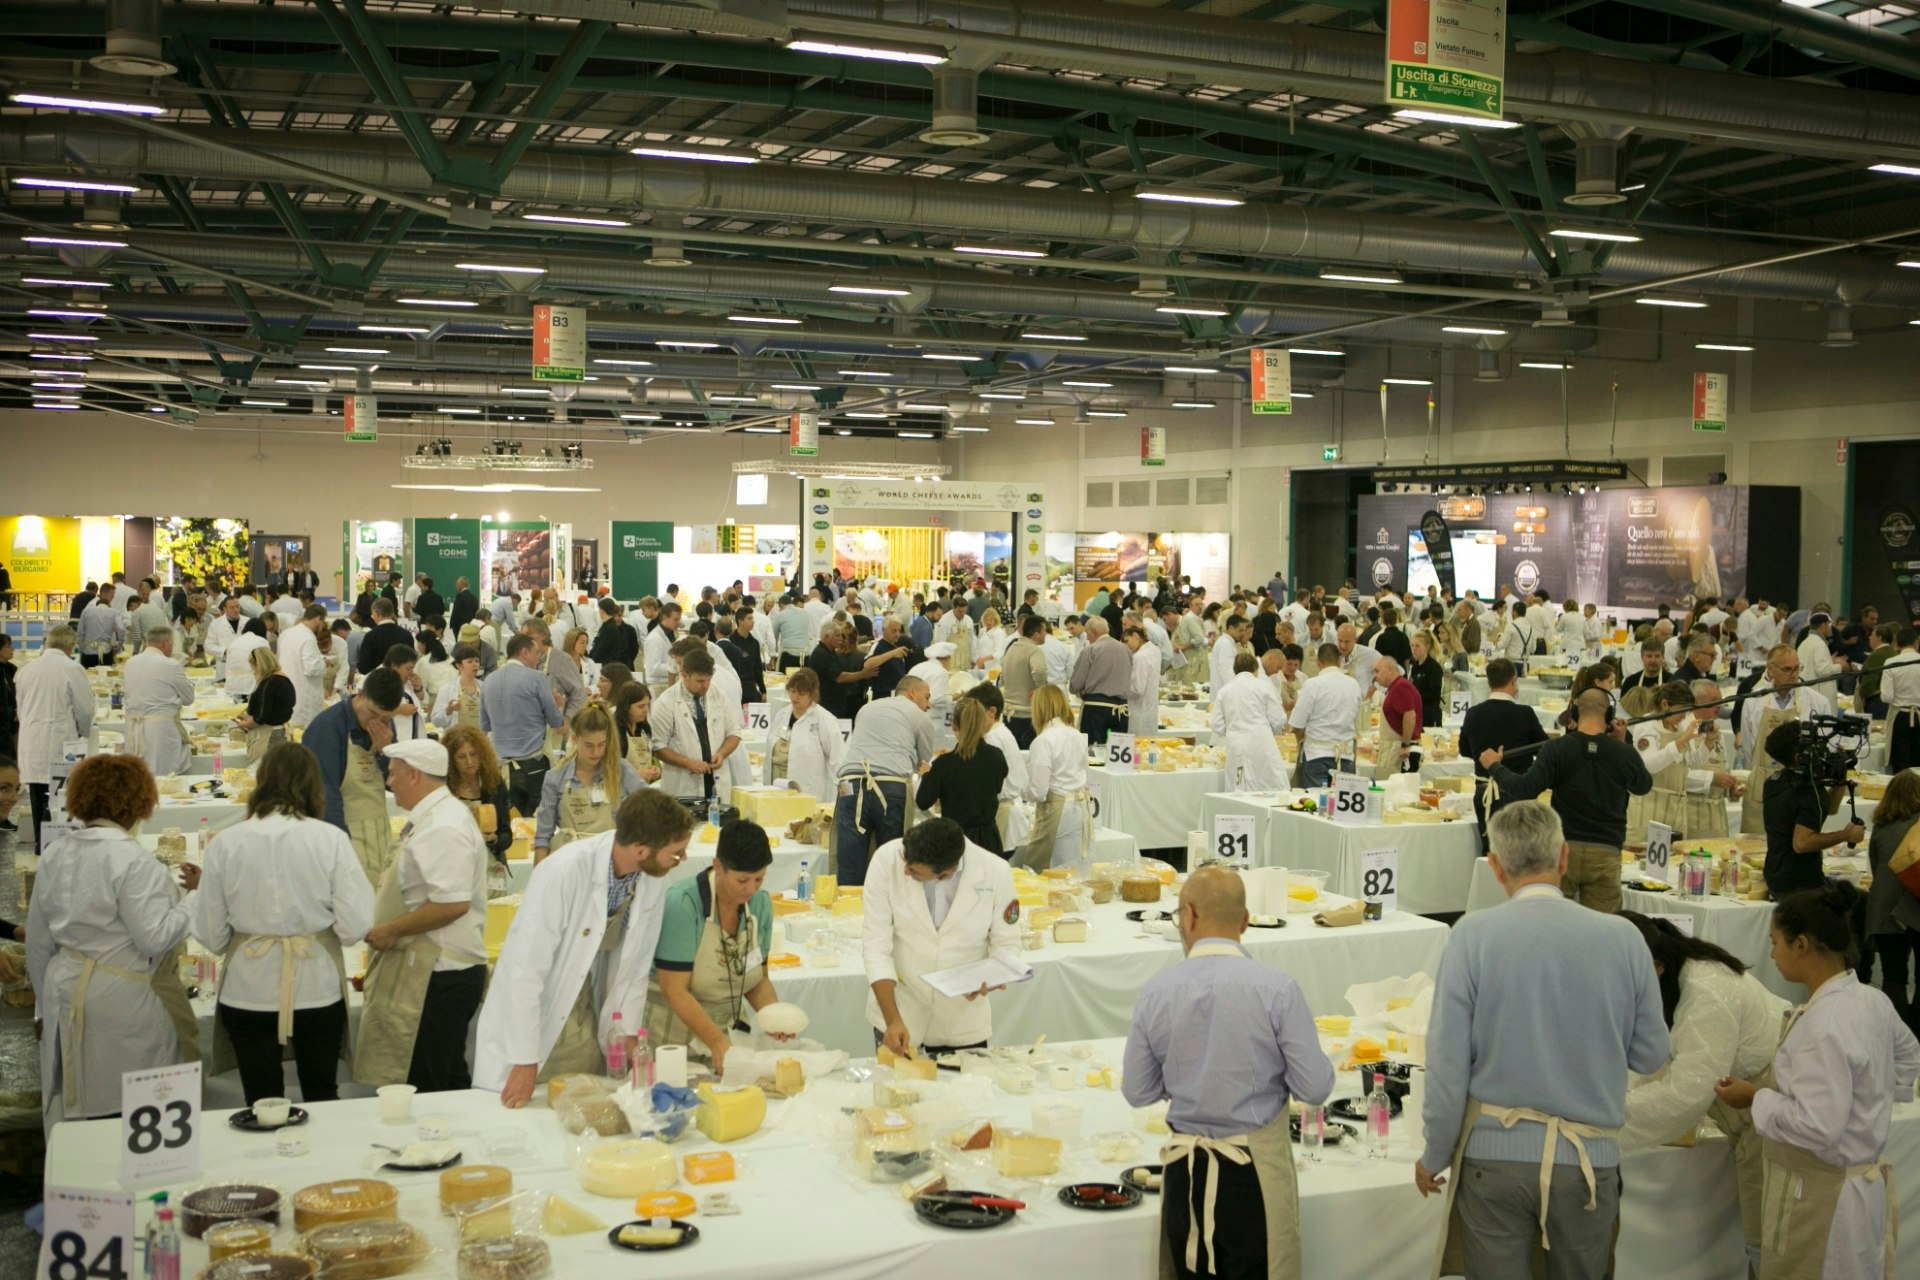 Judges in white coats sample plates of cheese, displayed on rows of tables